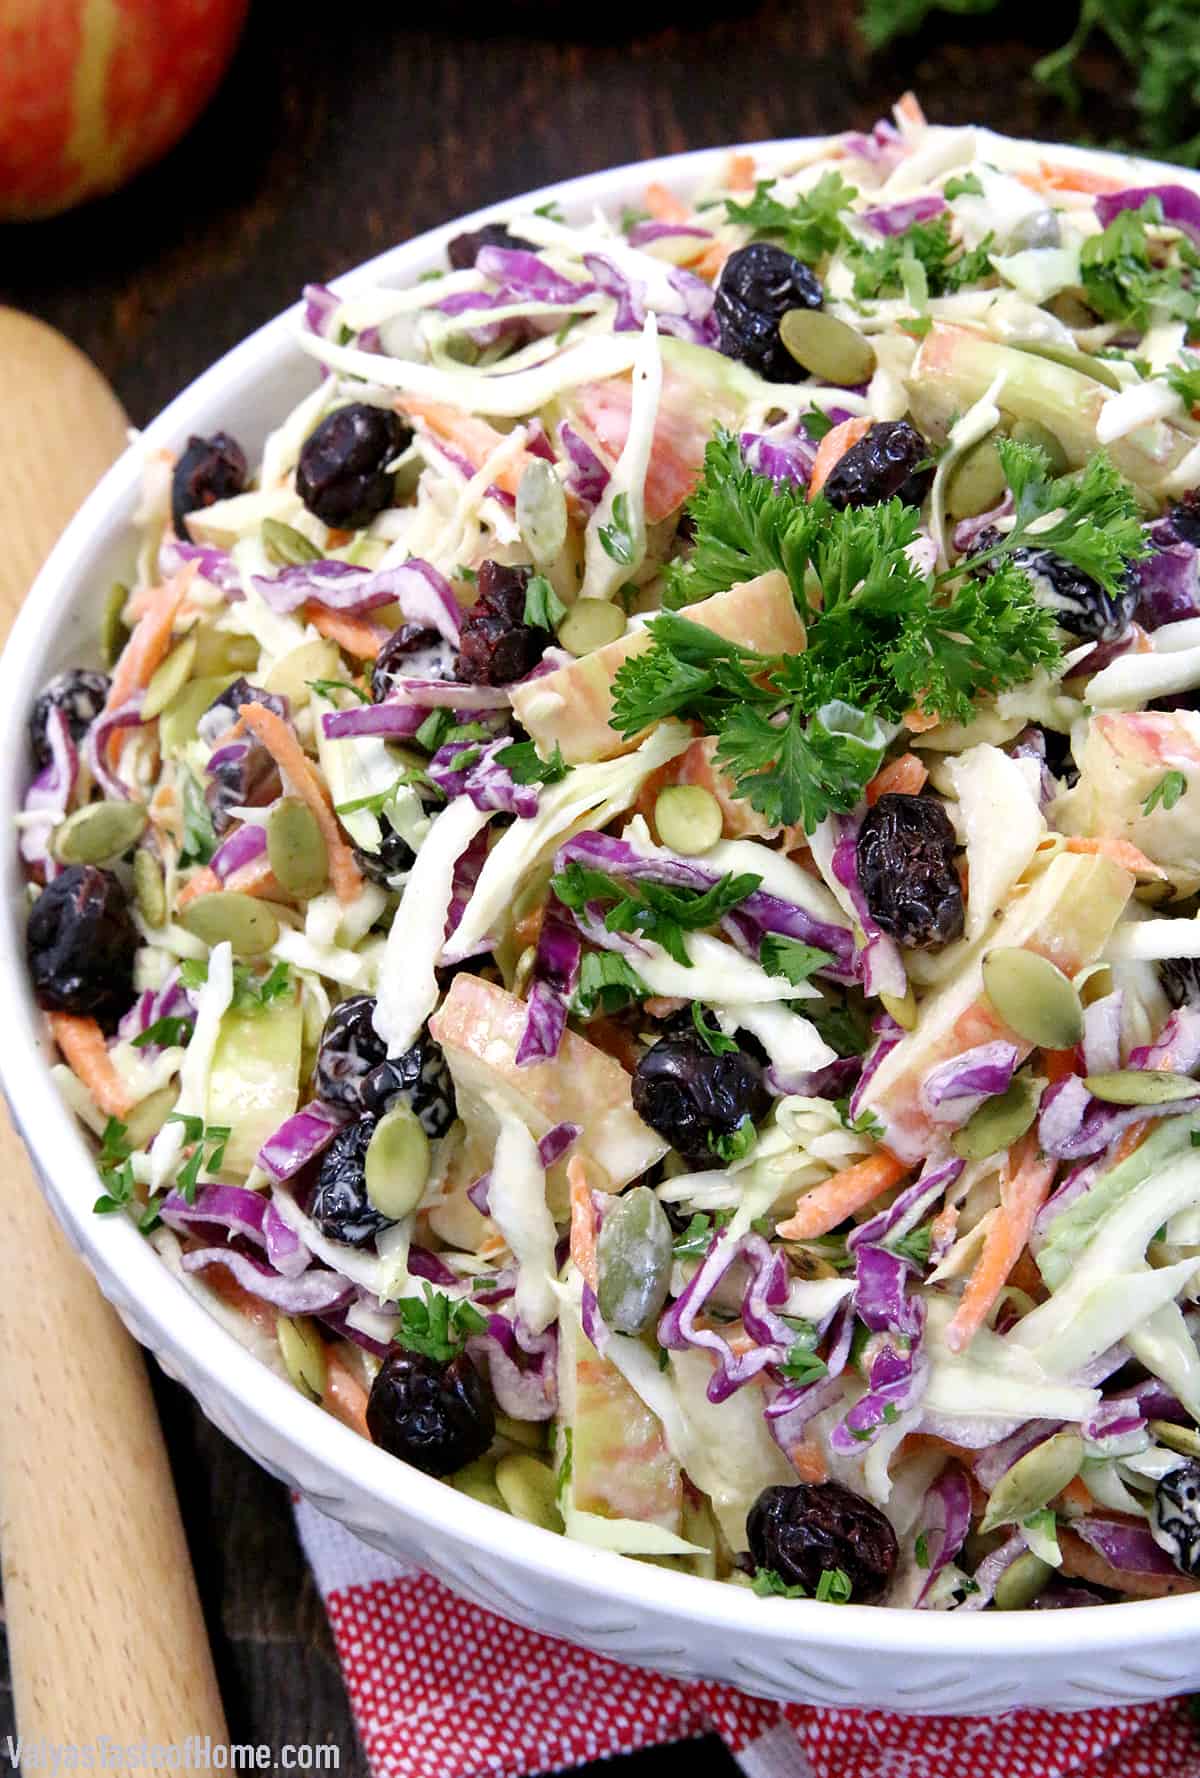 You've got the chops, my friend! This Easy Apple Cranberry Pumpkin Coleslaw Recipe is a must-have on your holiday table. There is nothing quite like a refreshing fresh and crunchy salad like this, bursting with tasty Fall flavors to accompany that scrumptious main dish on your plate.